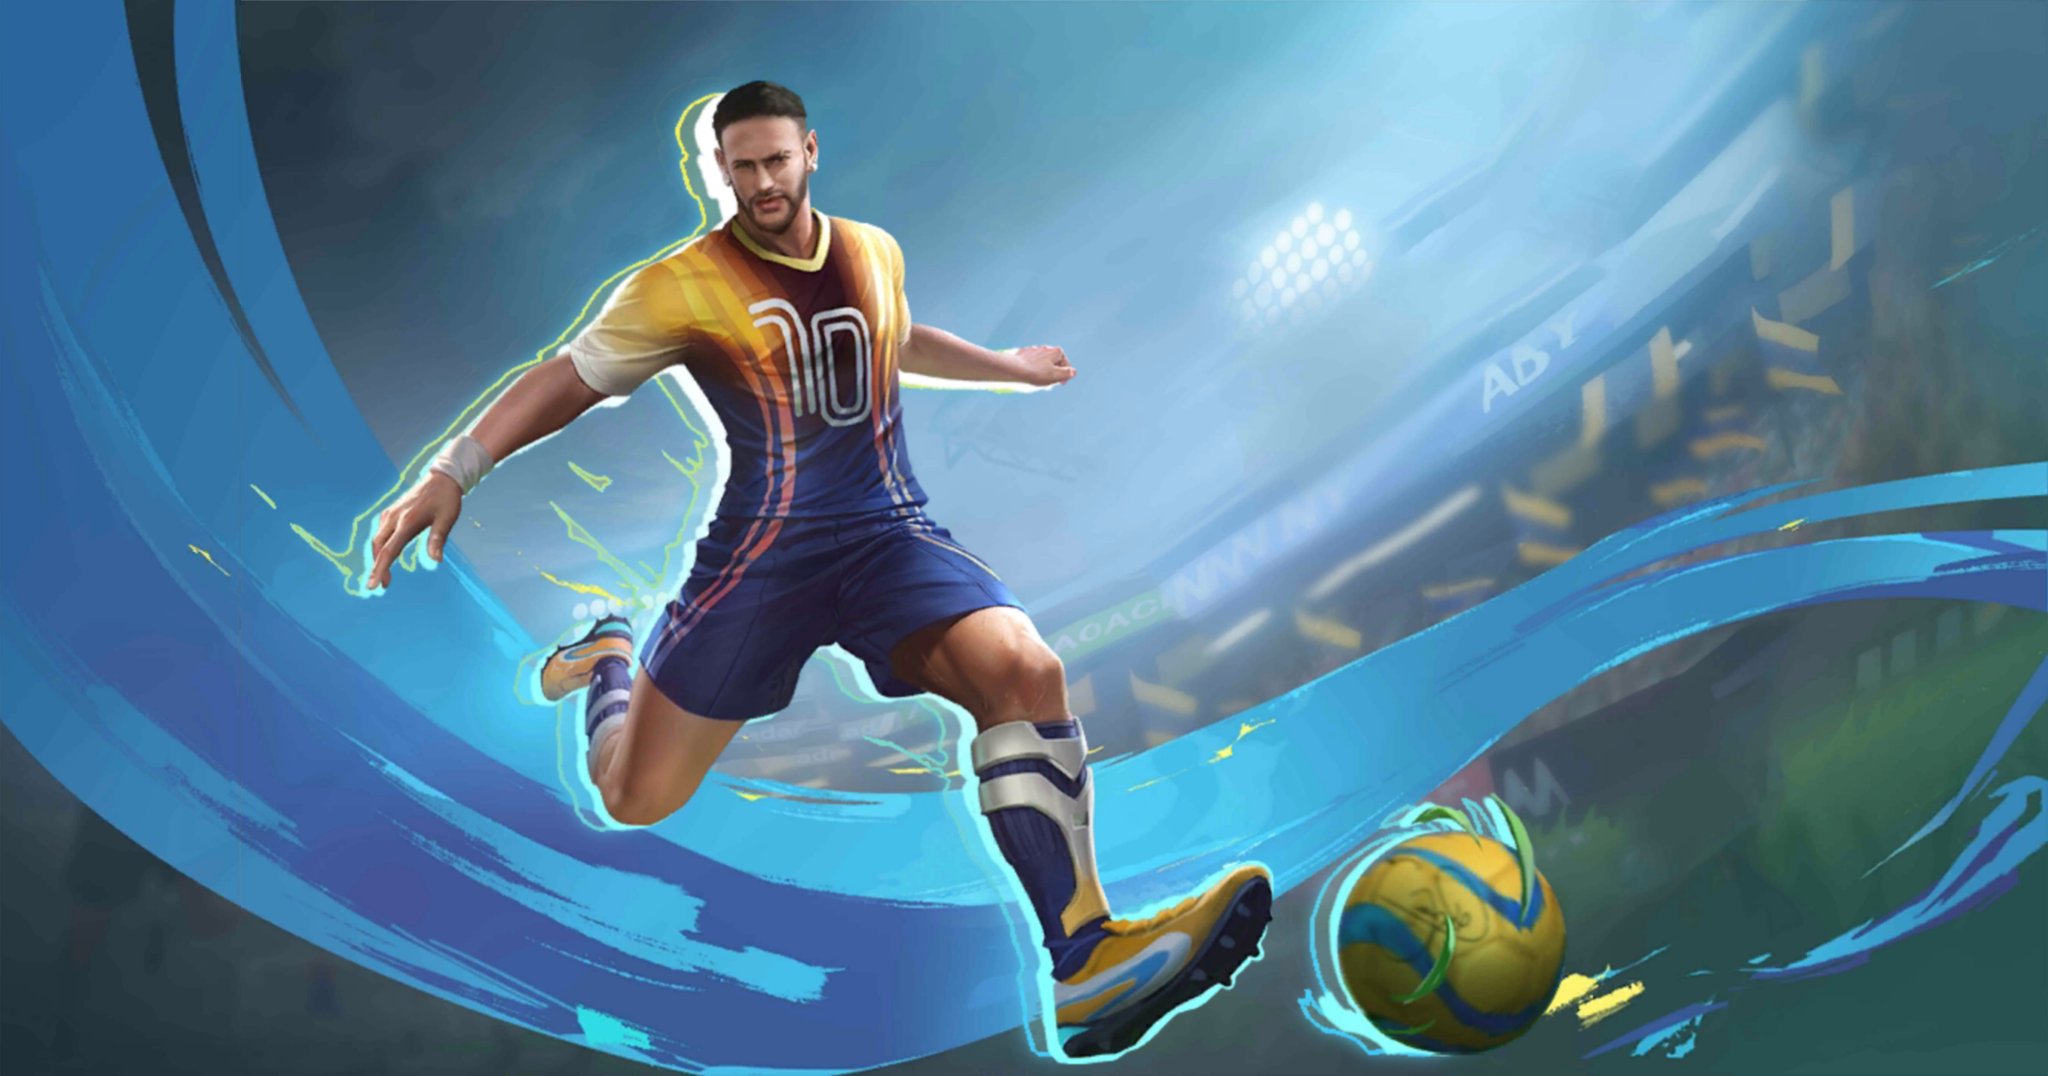 Mobile Legends: Bang Bang on X: MLBB X Neymar Jr Collab skin - Bruno  Neymar Jr will be available in the in-game event on 11/19! The special  event Root for Neymar Jr